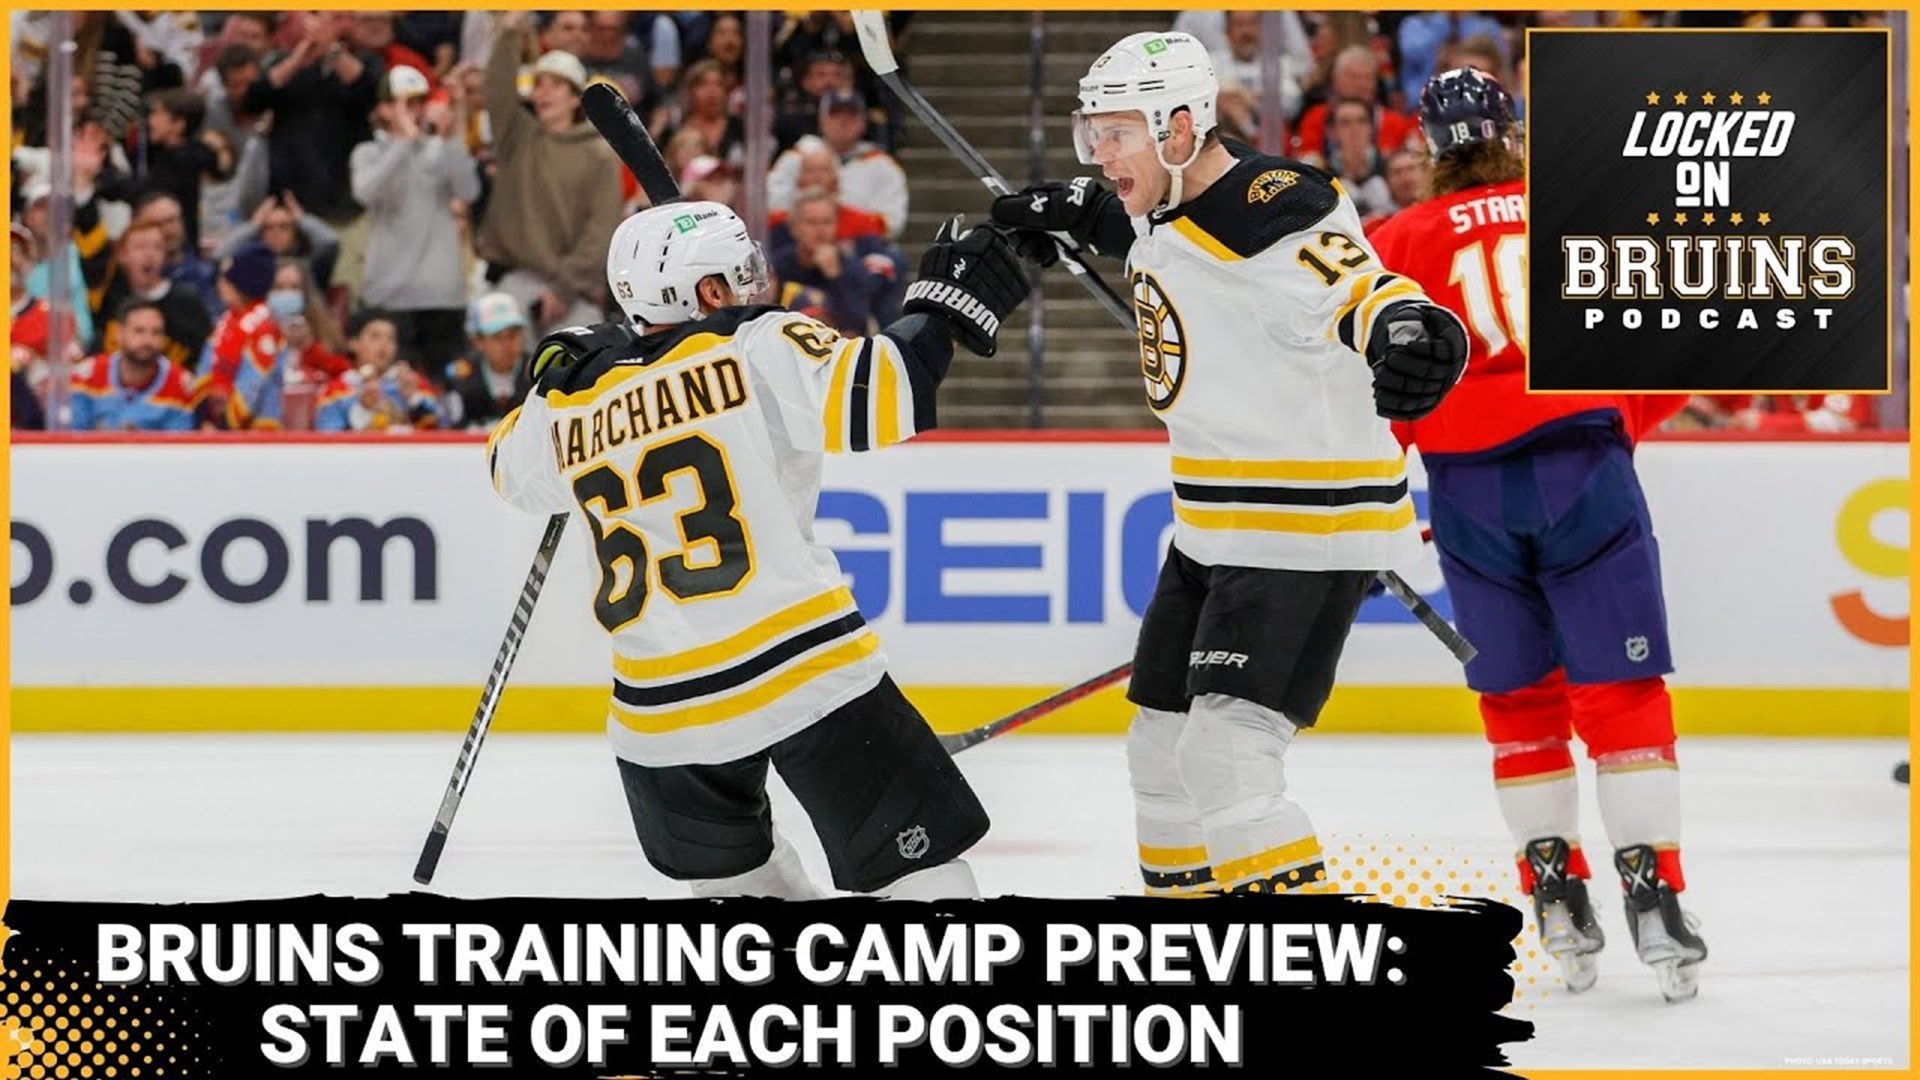 Boston Bruins training camp preview. What's the state of each position?